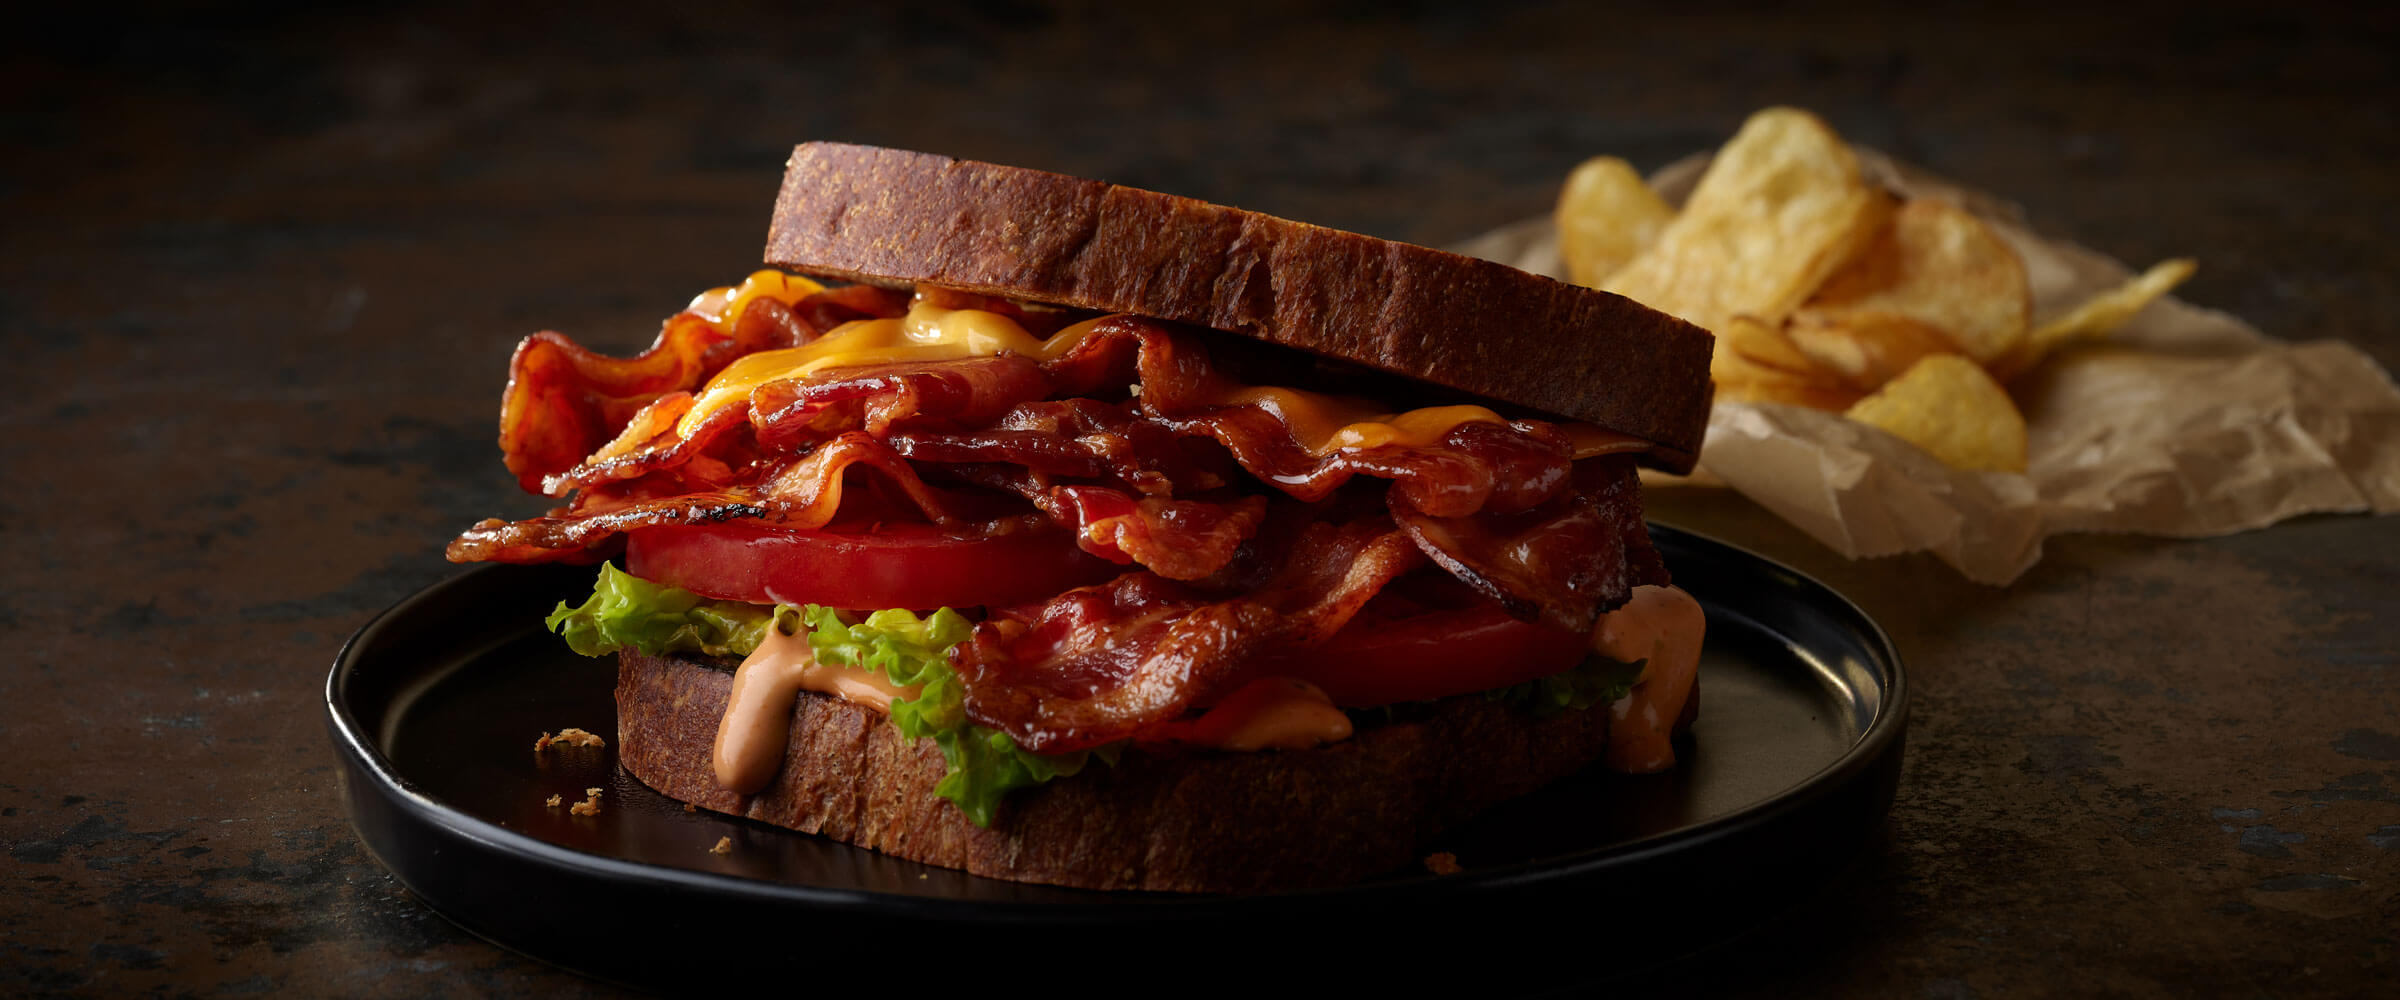 BLT with Cheese on black plate with side of chips